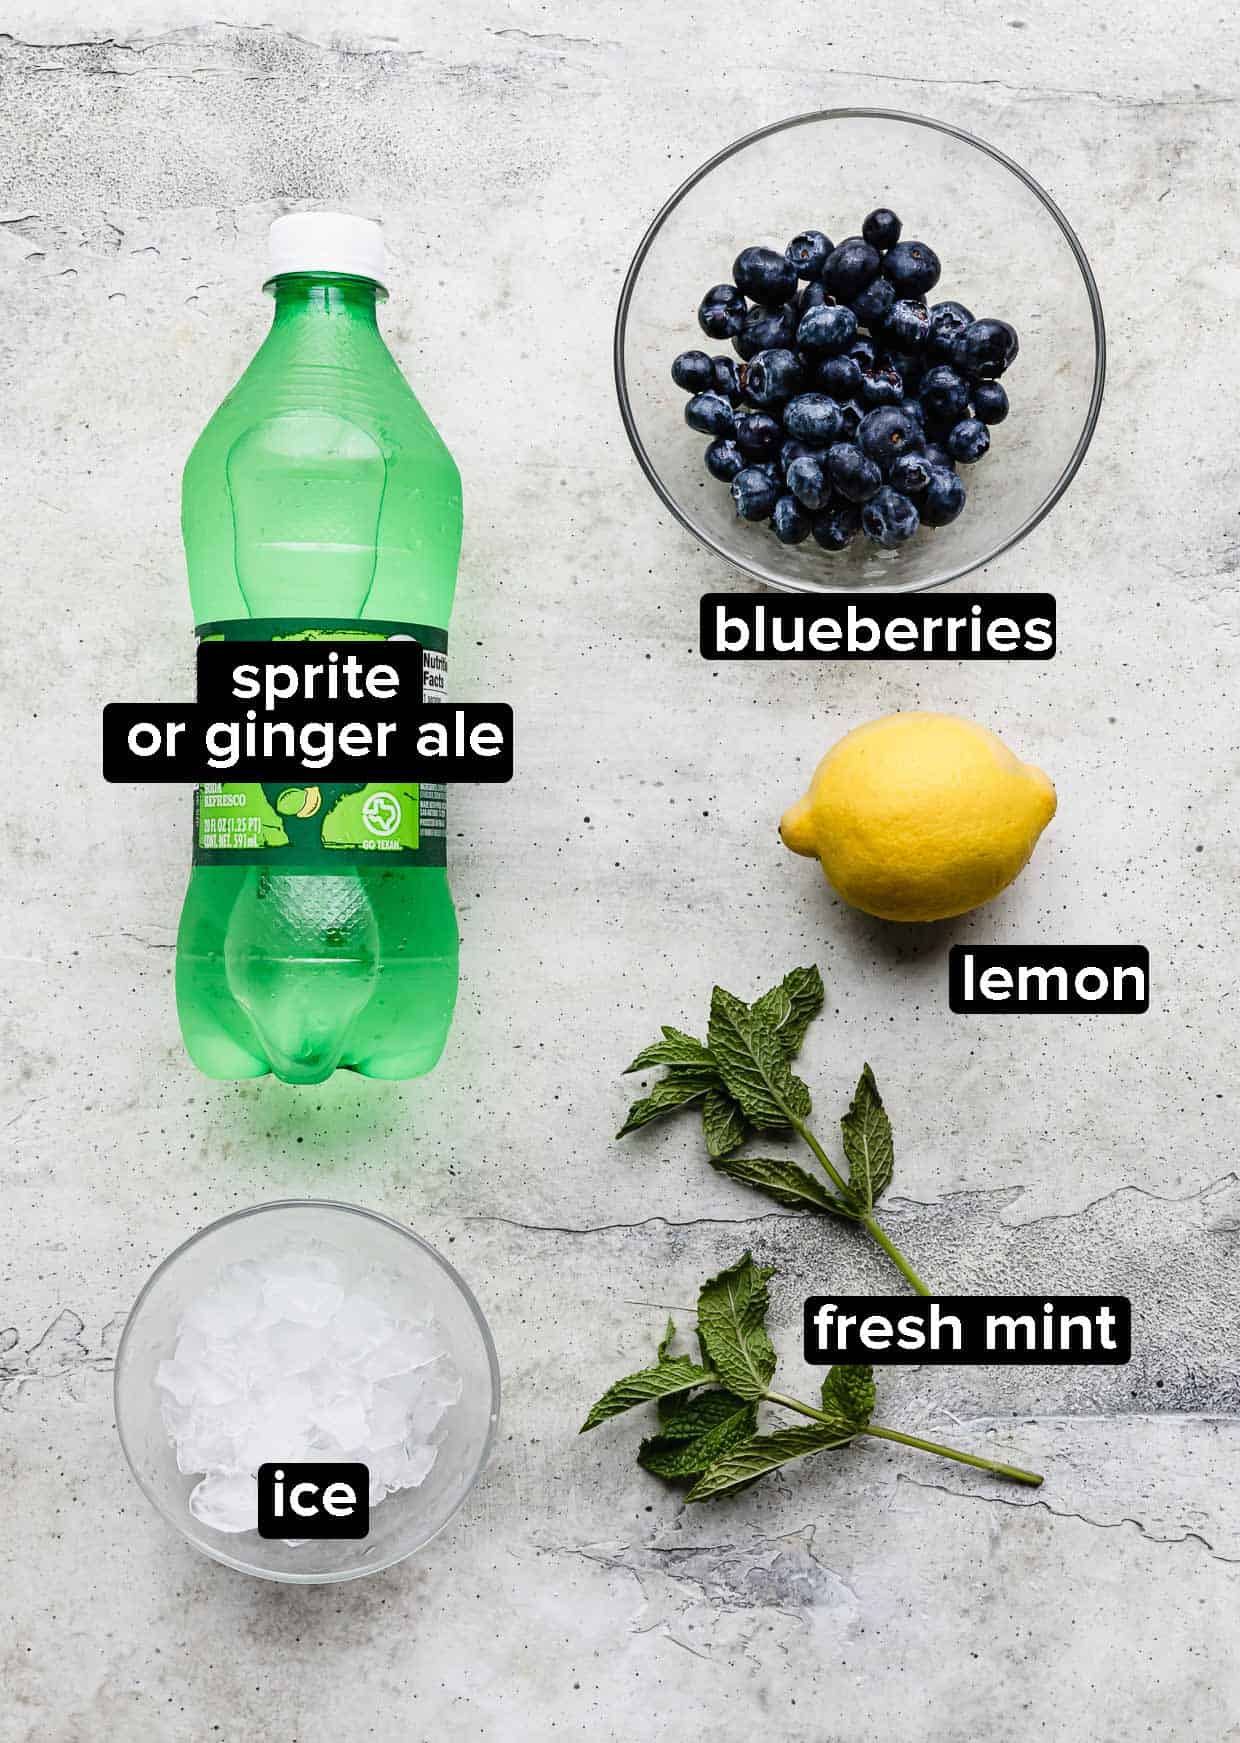 Ingredients used to make a blueberry mocktail with sprite or ginger ale.